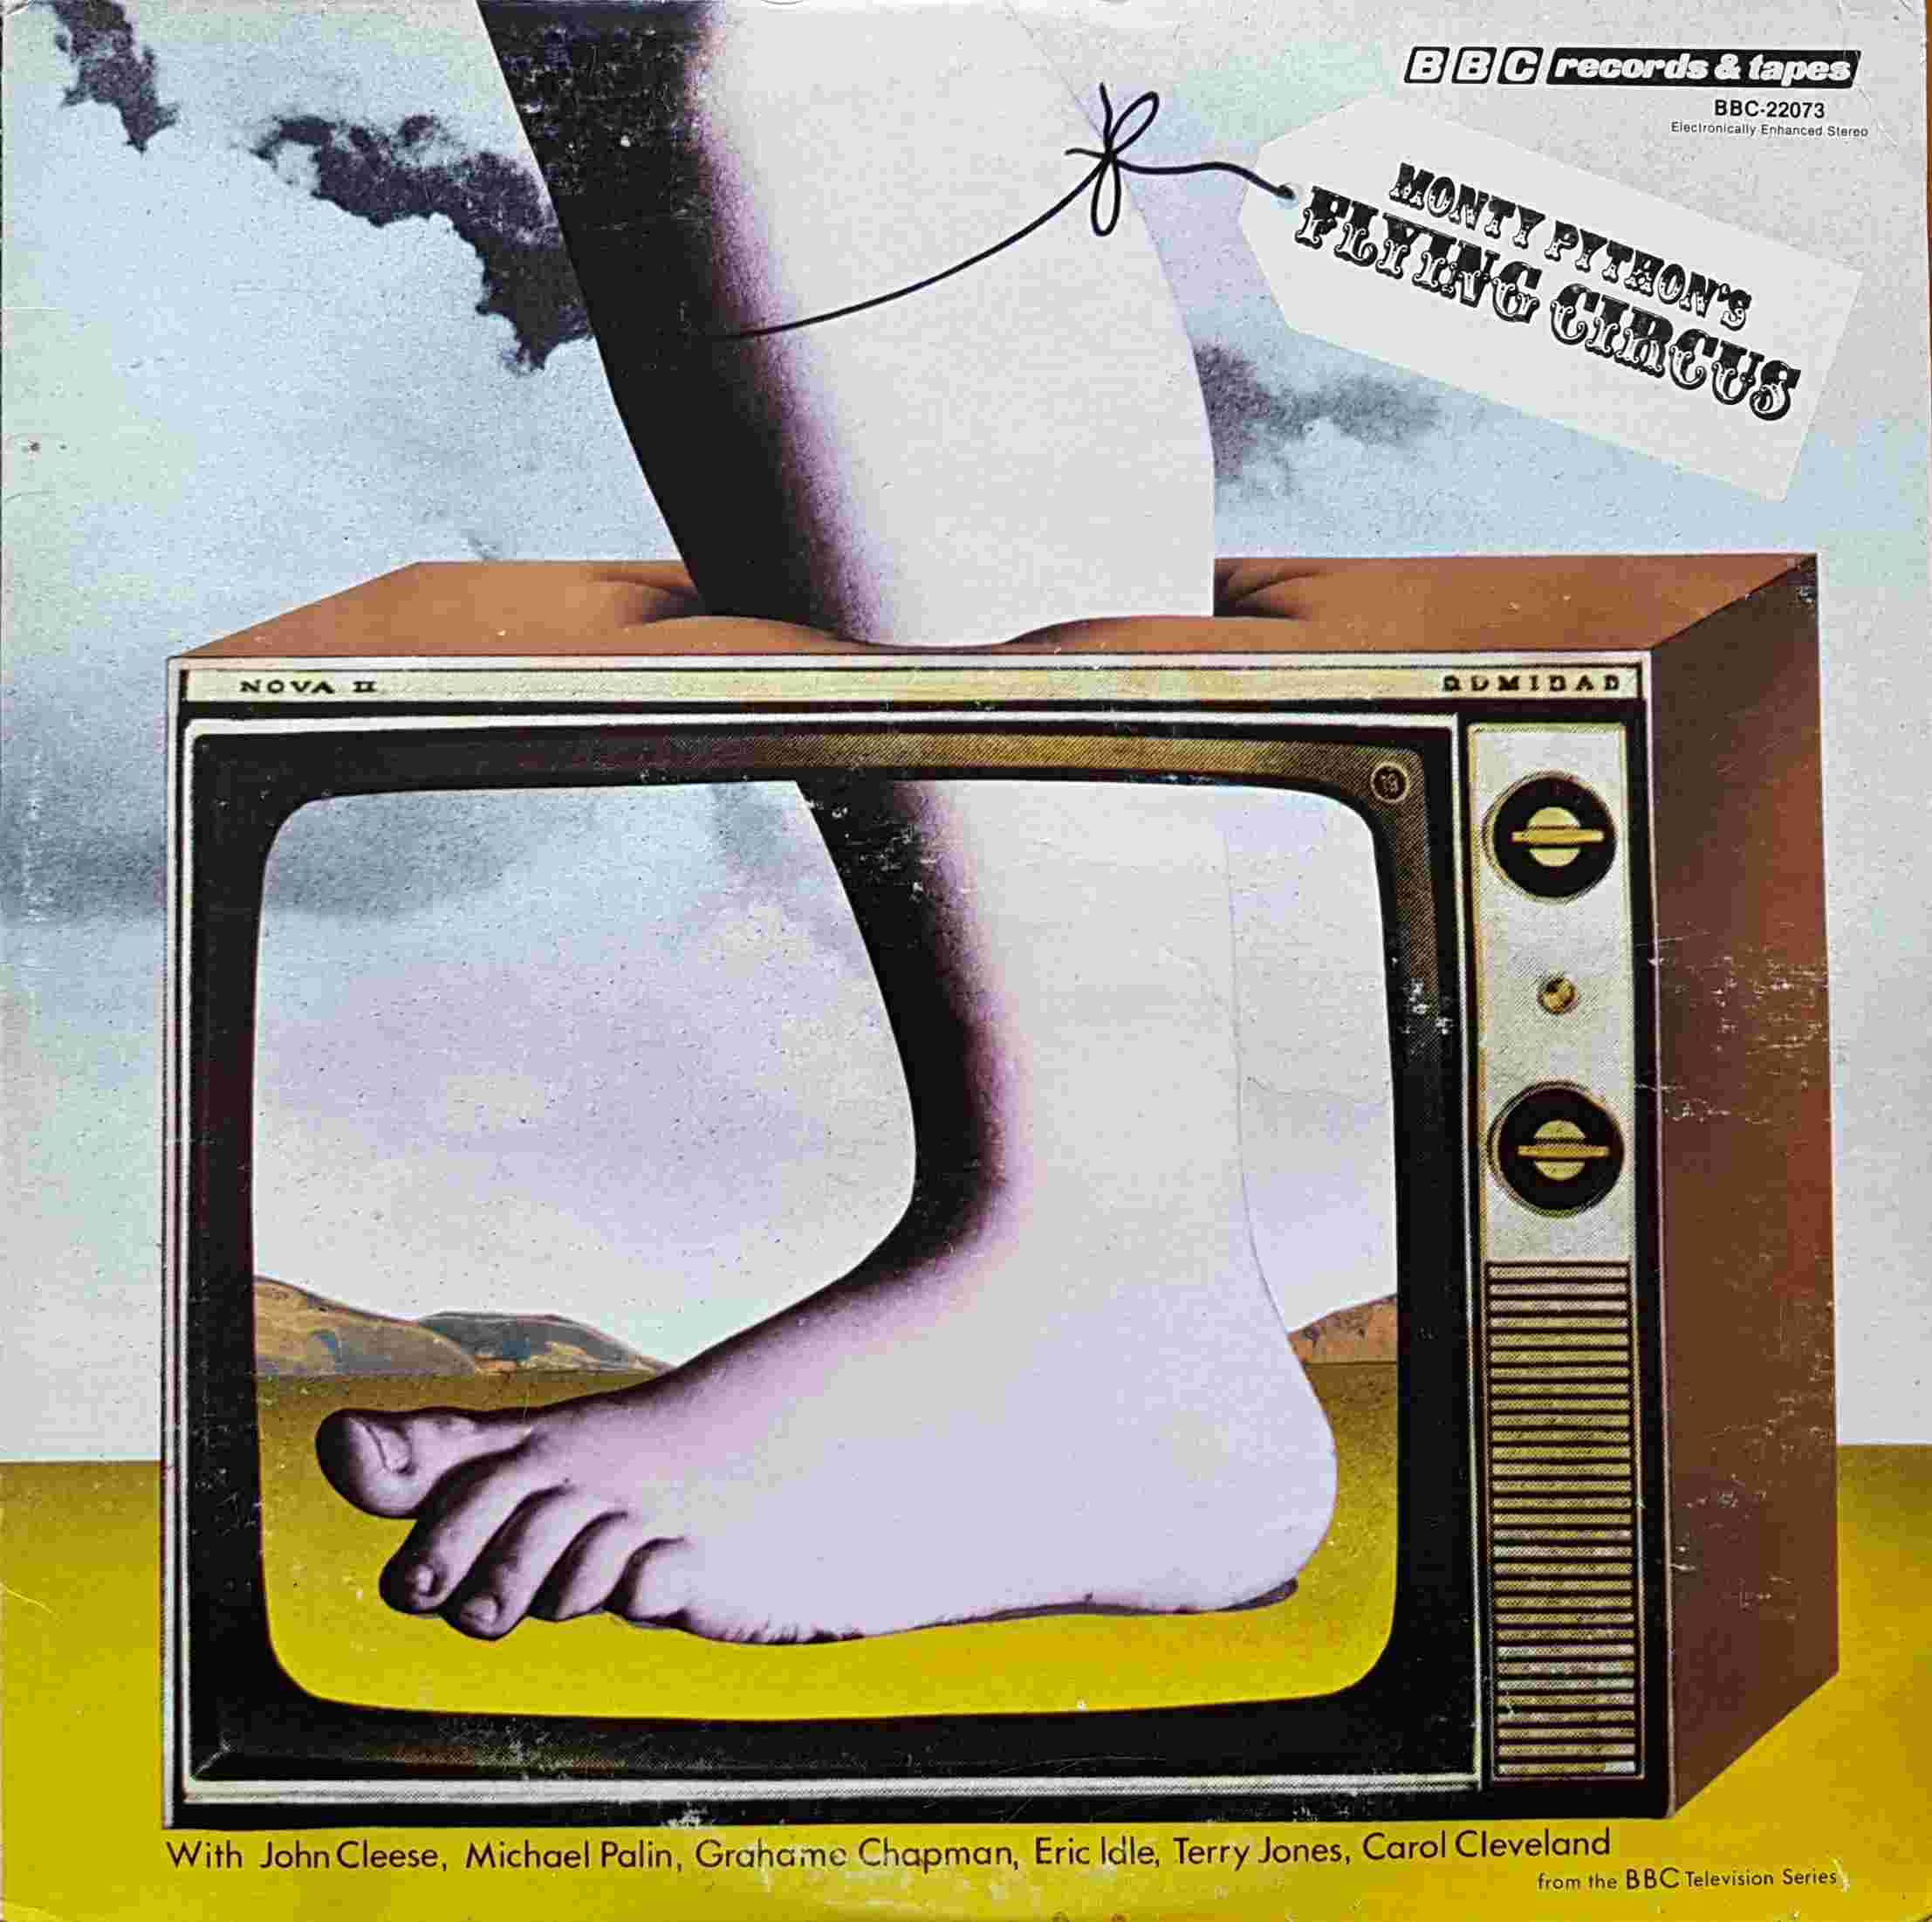 Picture of BBC - 22073 Monty Python's flying circus (US import) by artist Monty Python from the BBC albums - Records and Tapes library